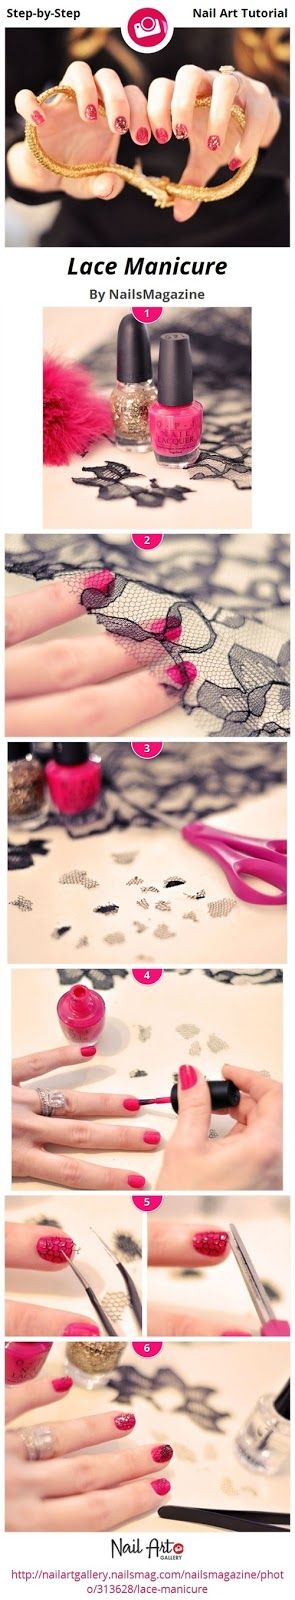 Lace nails tutorial